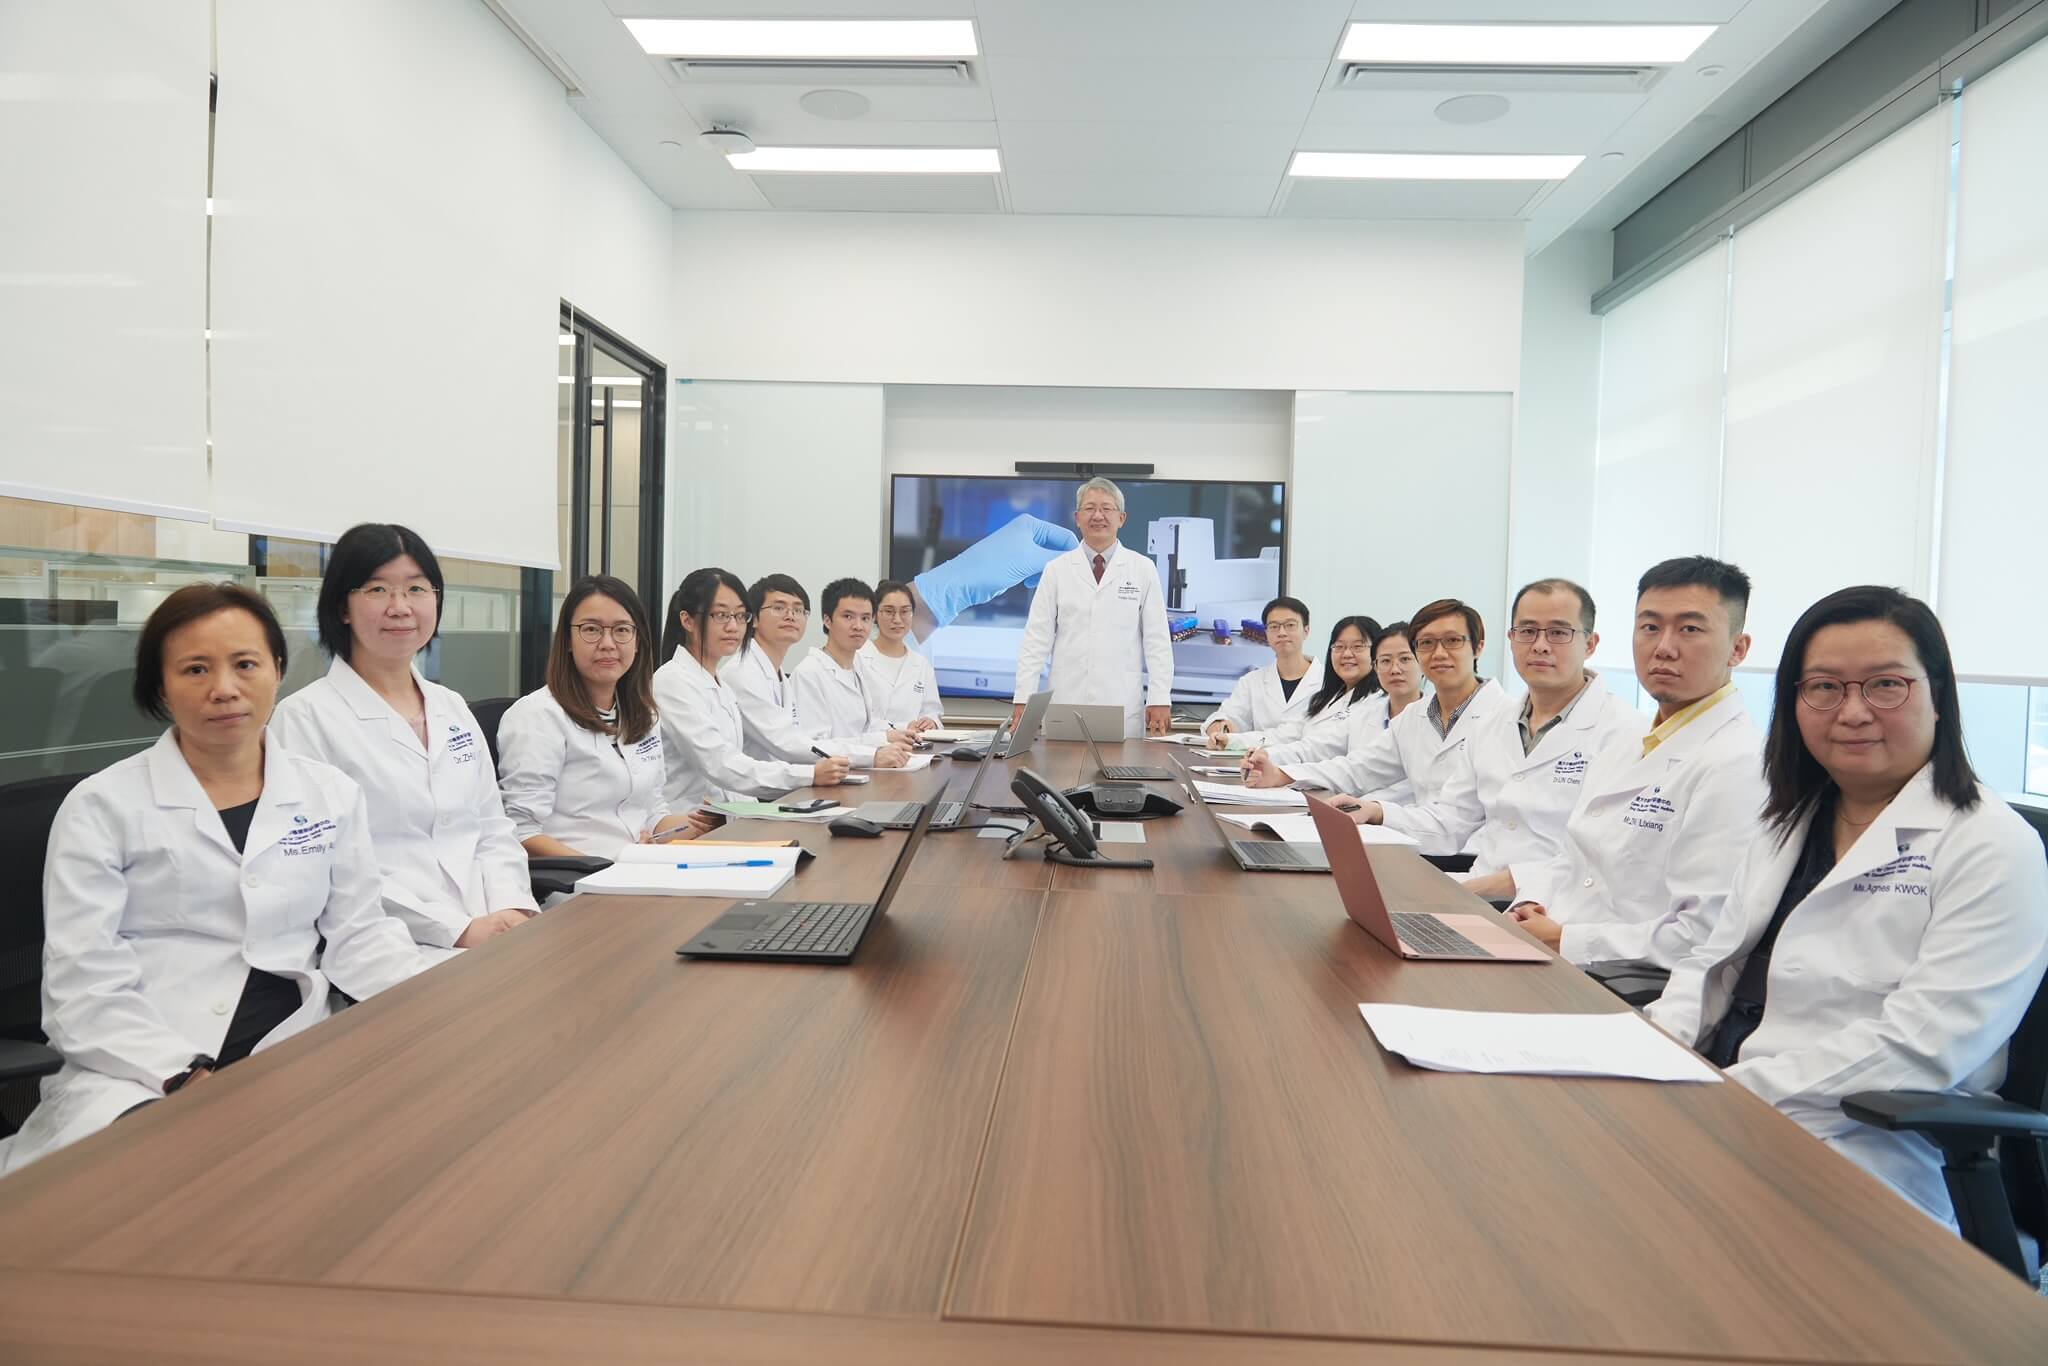 The Centre is established to perform Chinese herbal medicine research in Hong Kong through collaboration with local and international partners.